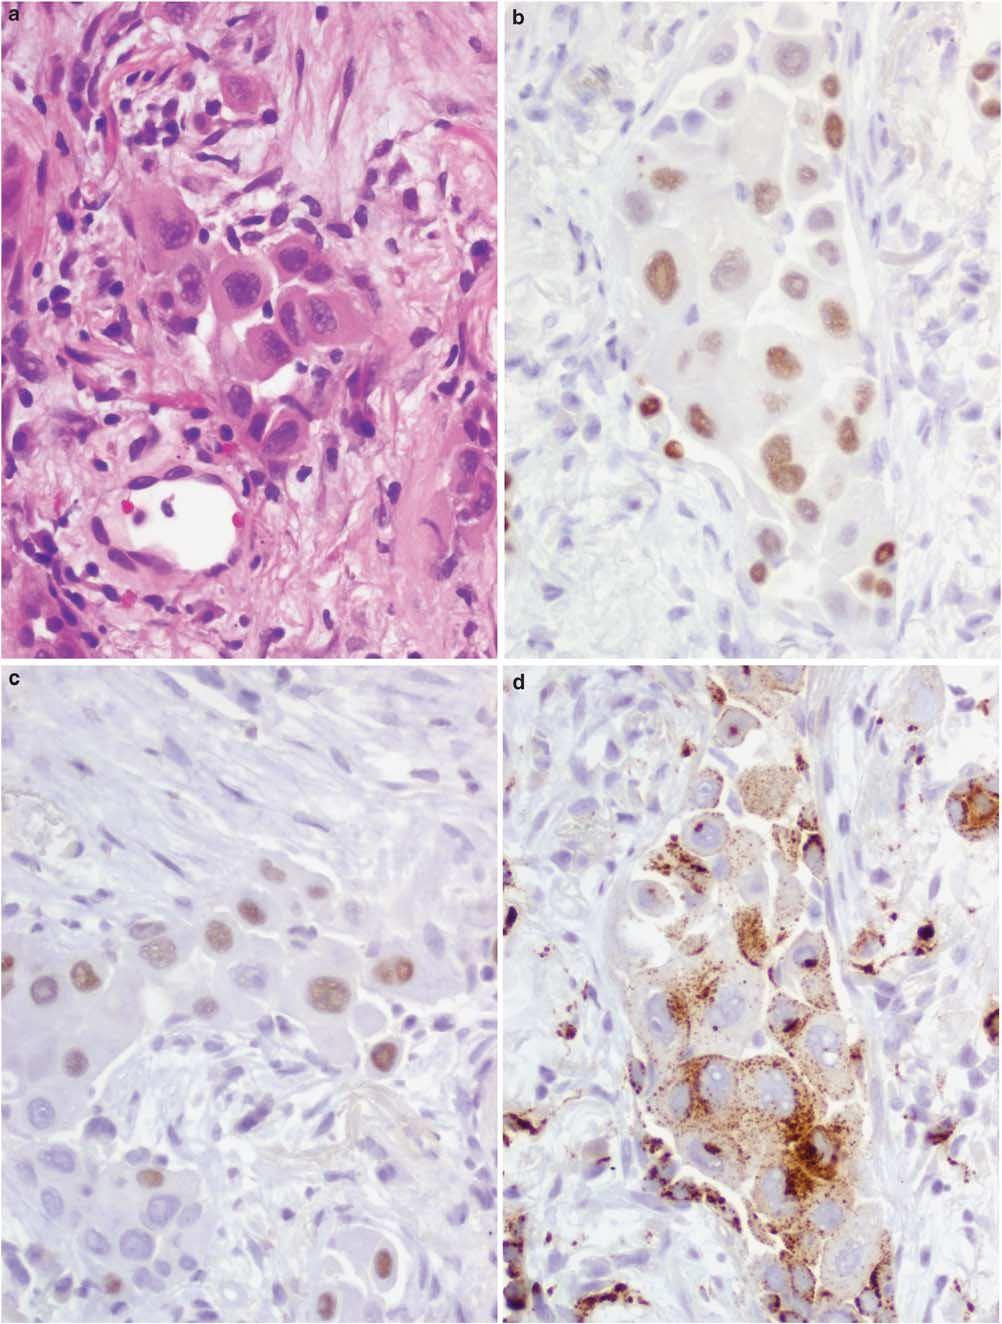 S50 Small biopsies of lung nodules Figure 7 p63 positivity in poorly differentiated adenocarcinoma. (a) Poorly differentiated non-small cell lung carcinoma in a small biopsy.